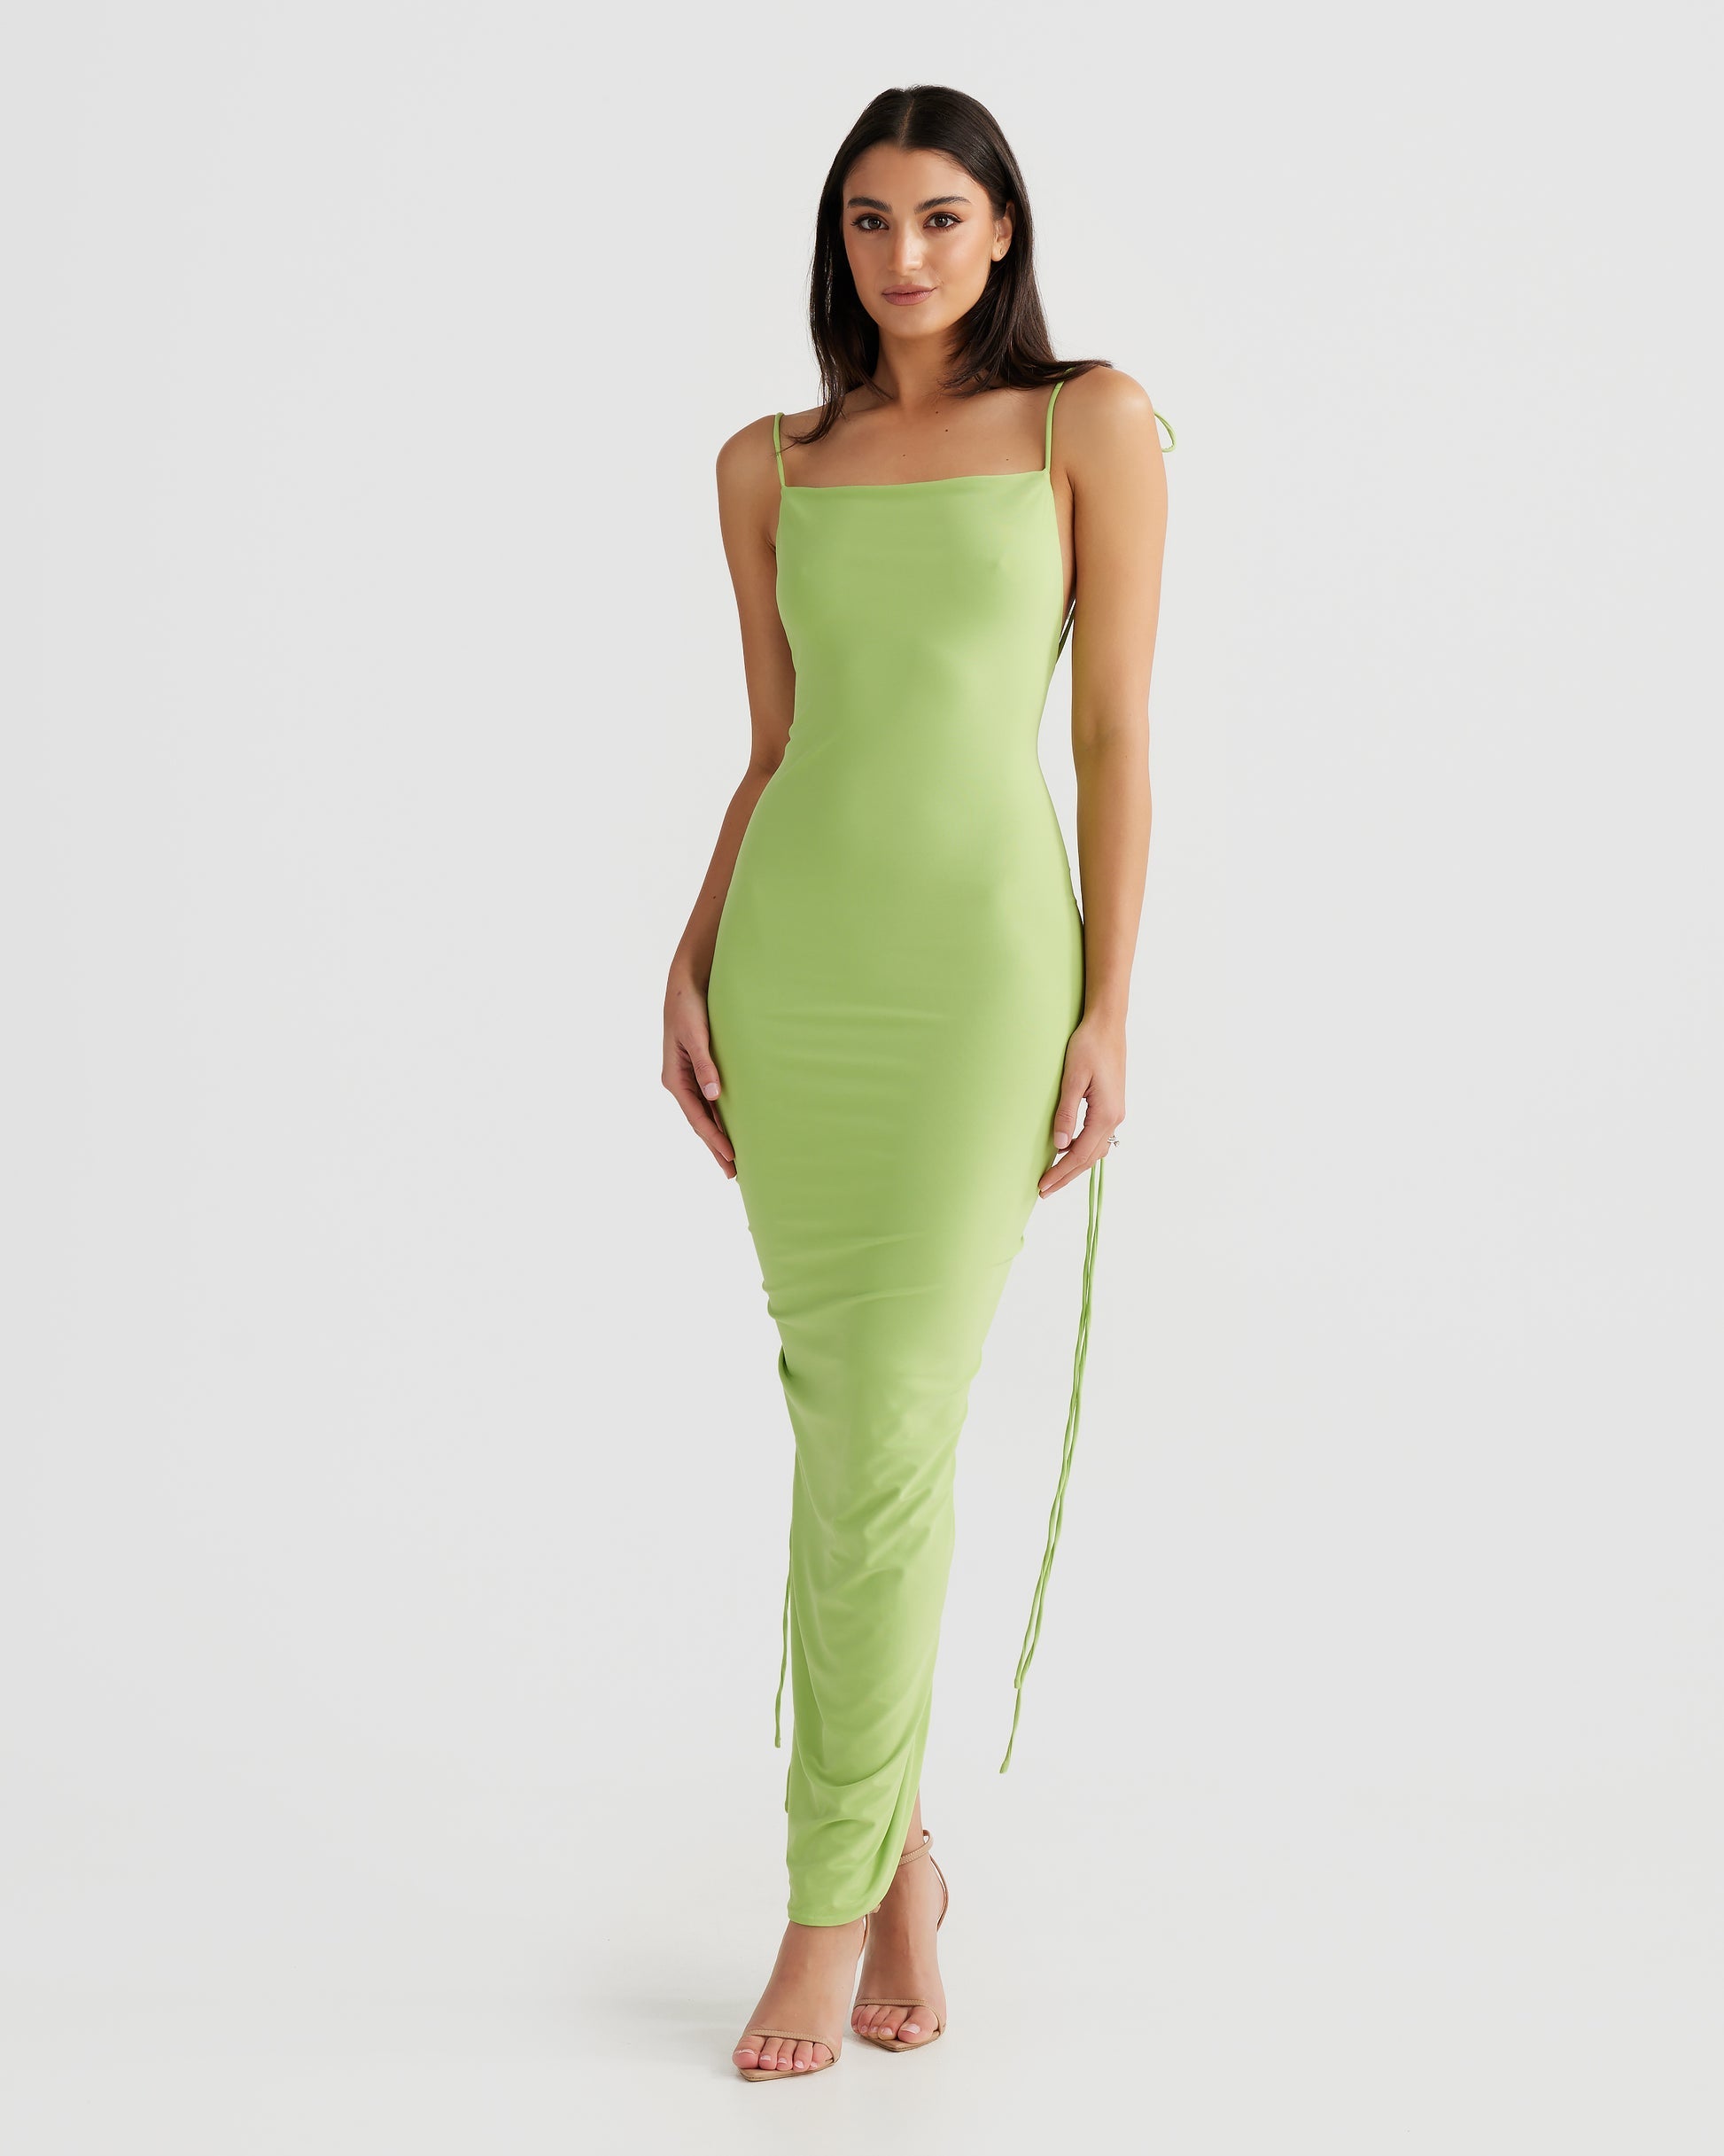 MÉLANI The Label CLEO Lime Bum Ruched Backless Dress